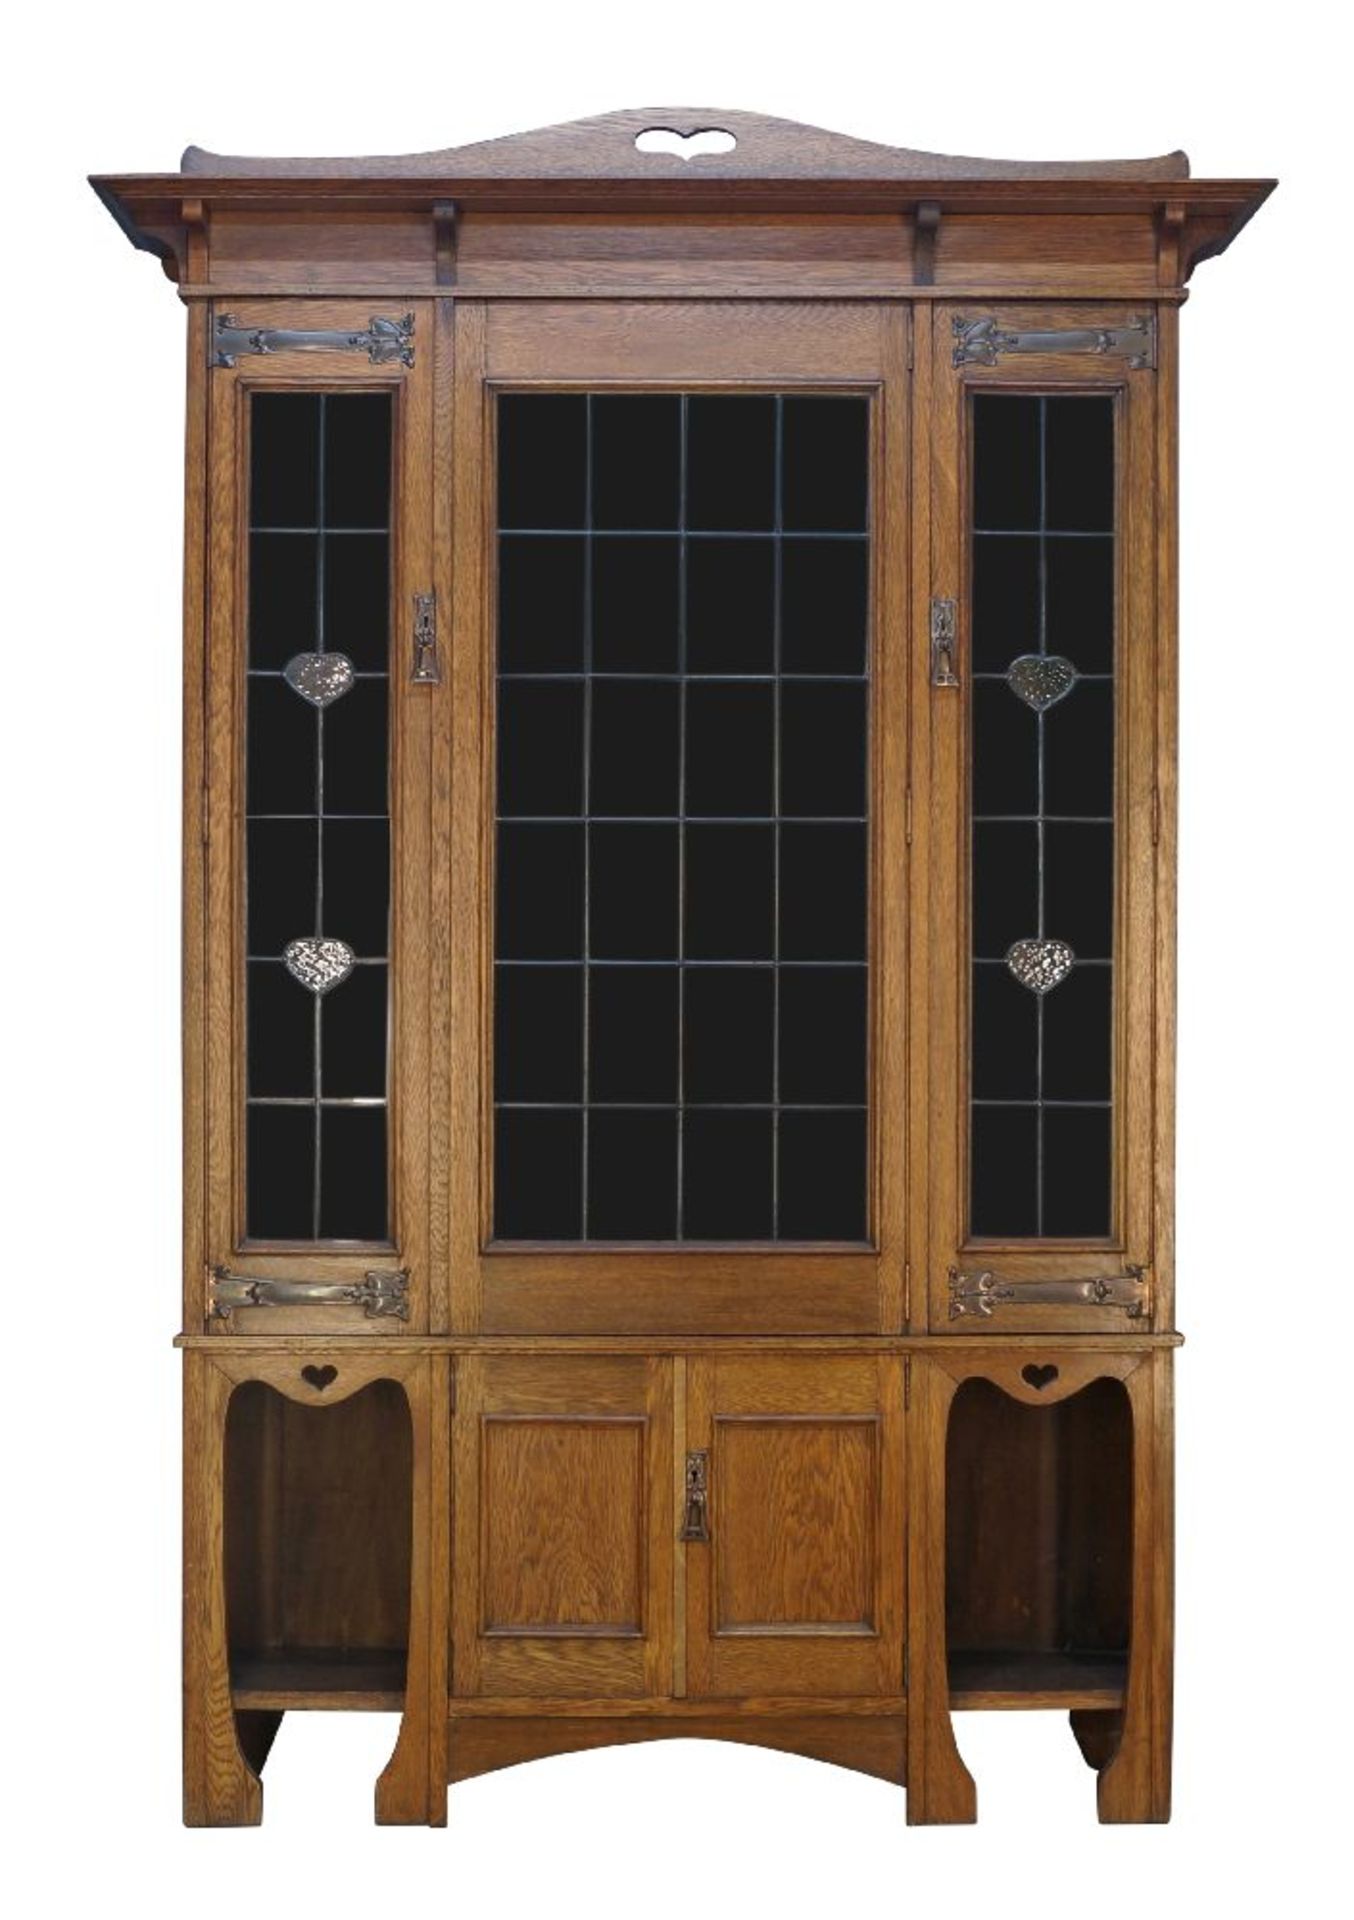 An Art Nouveau oak bookcase, c.1905, The moulded cornice surmounted by arched panel with pierced